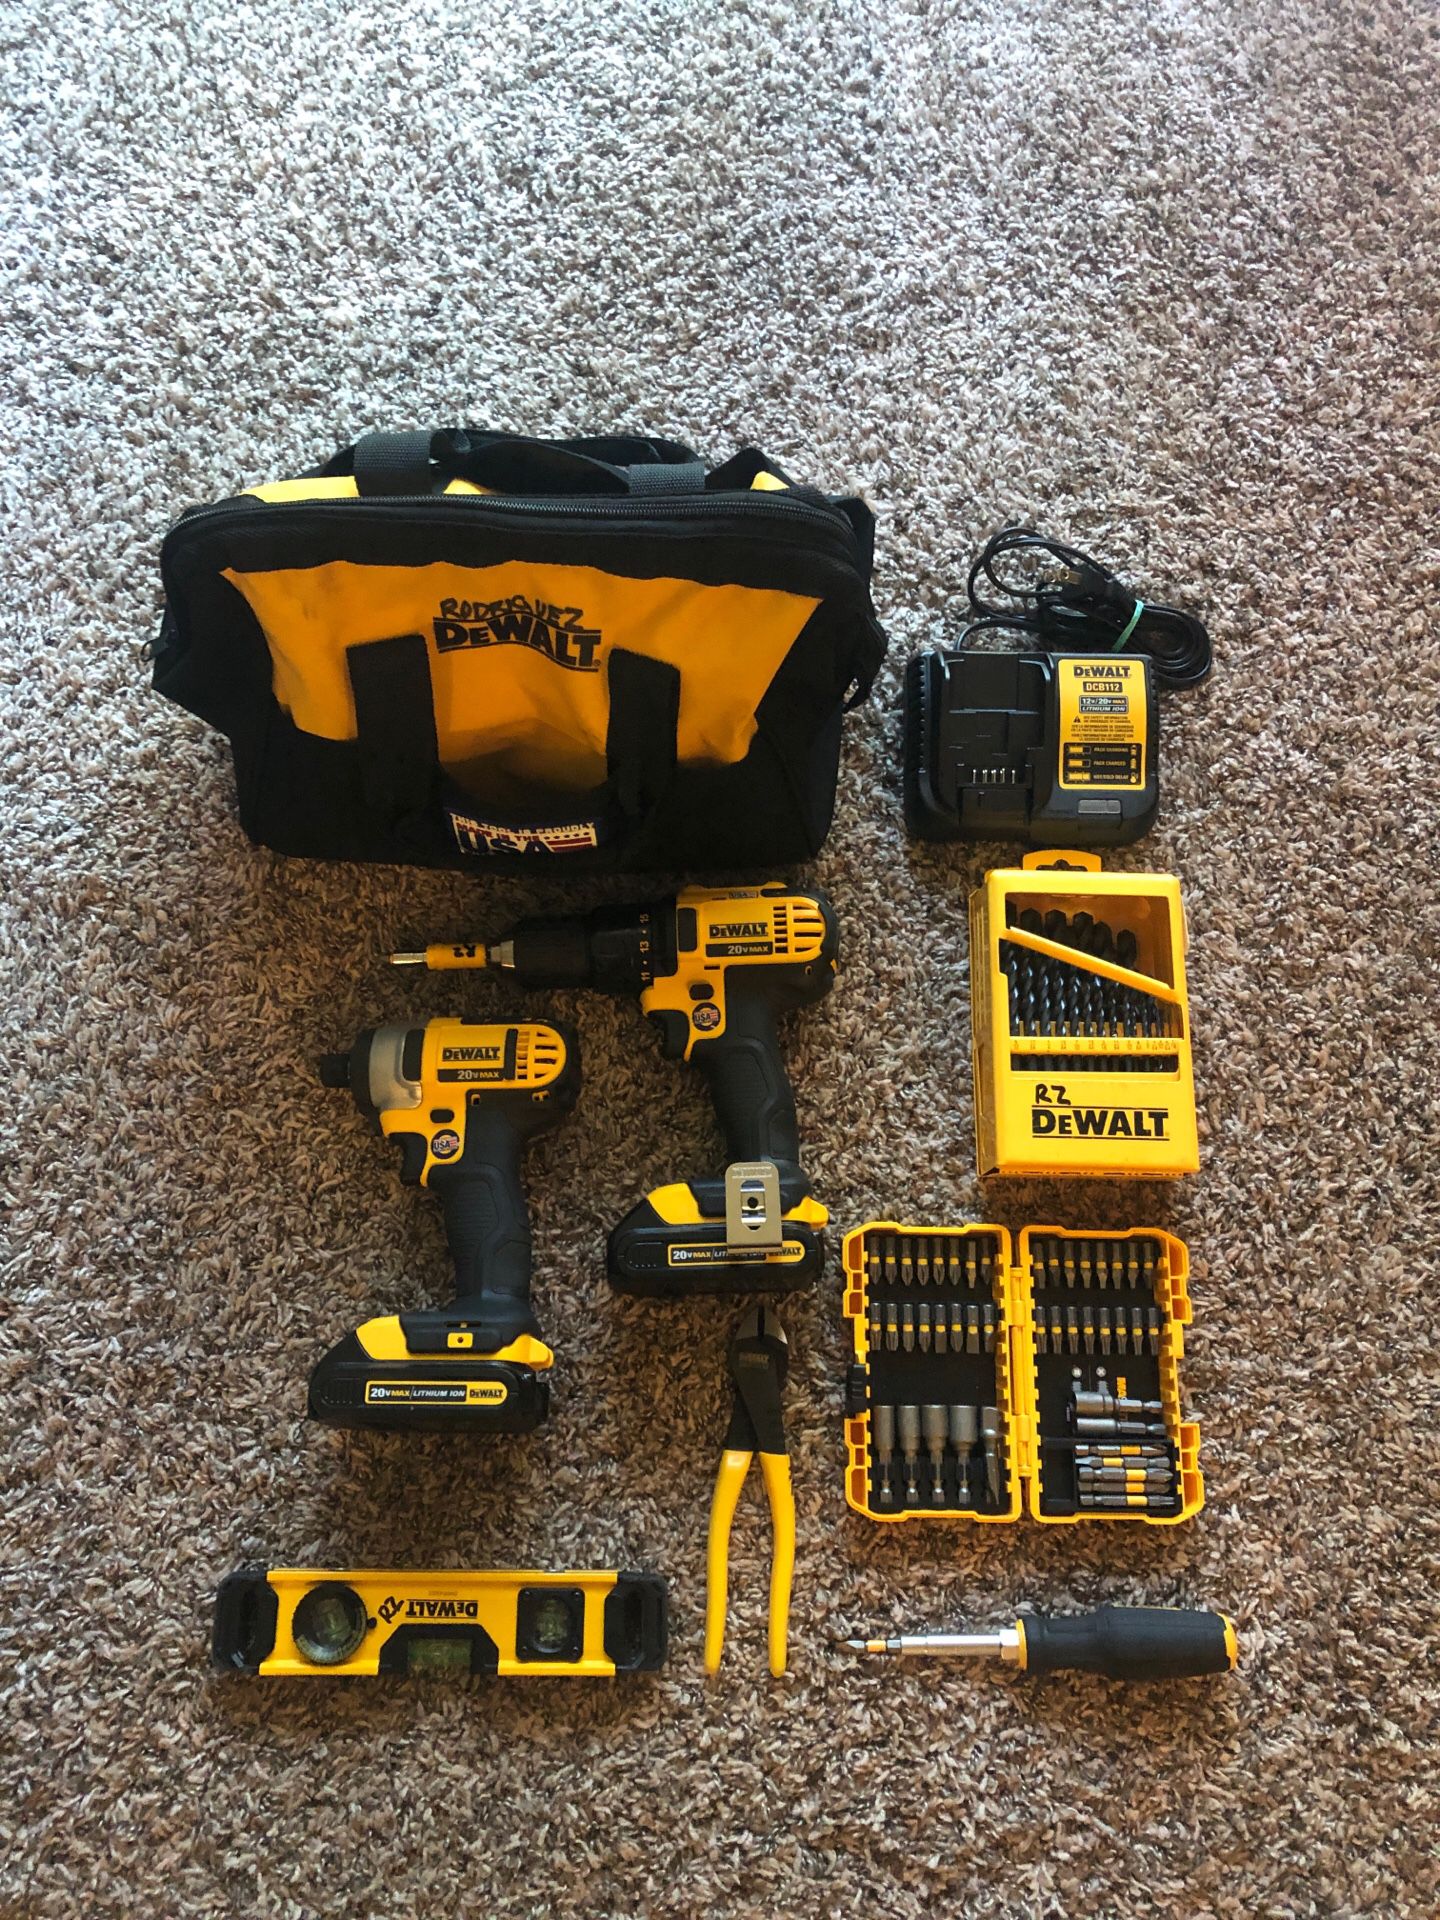 DeWalt drill driver/impact 20v set includes everything in picture